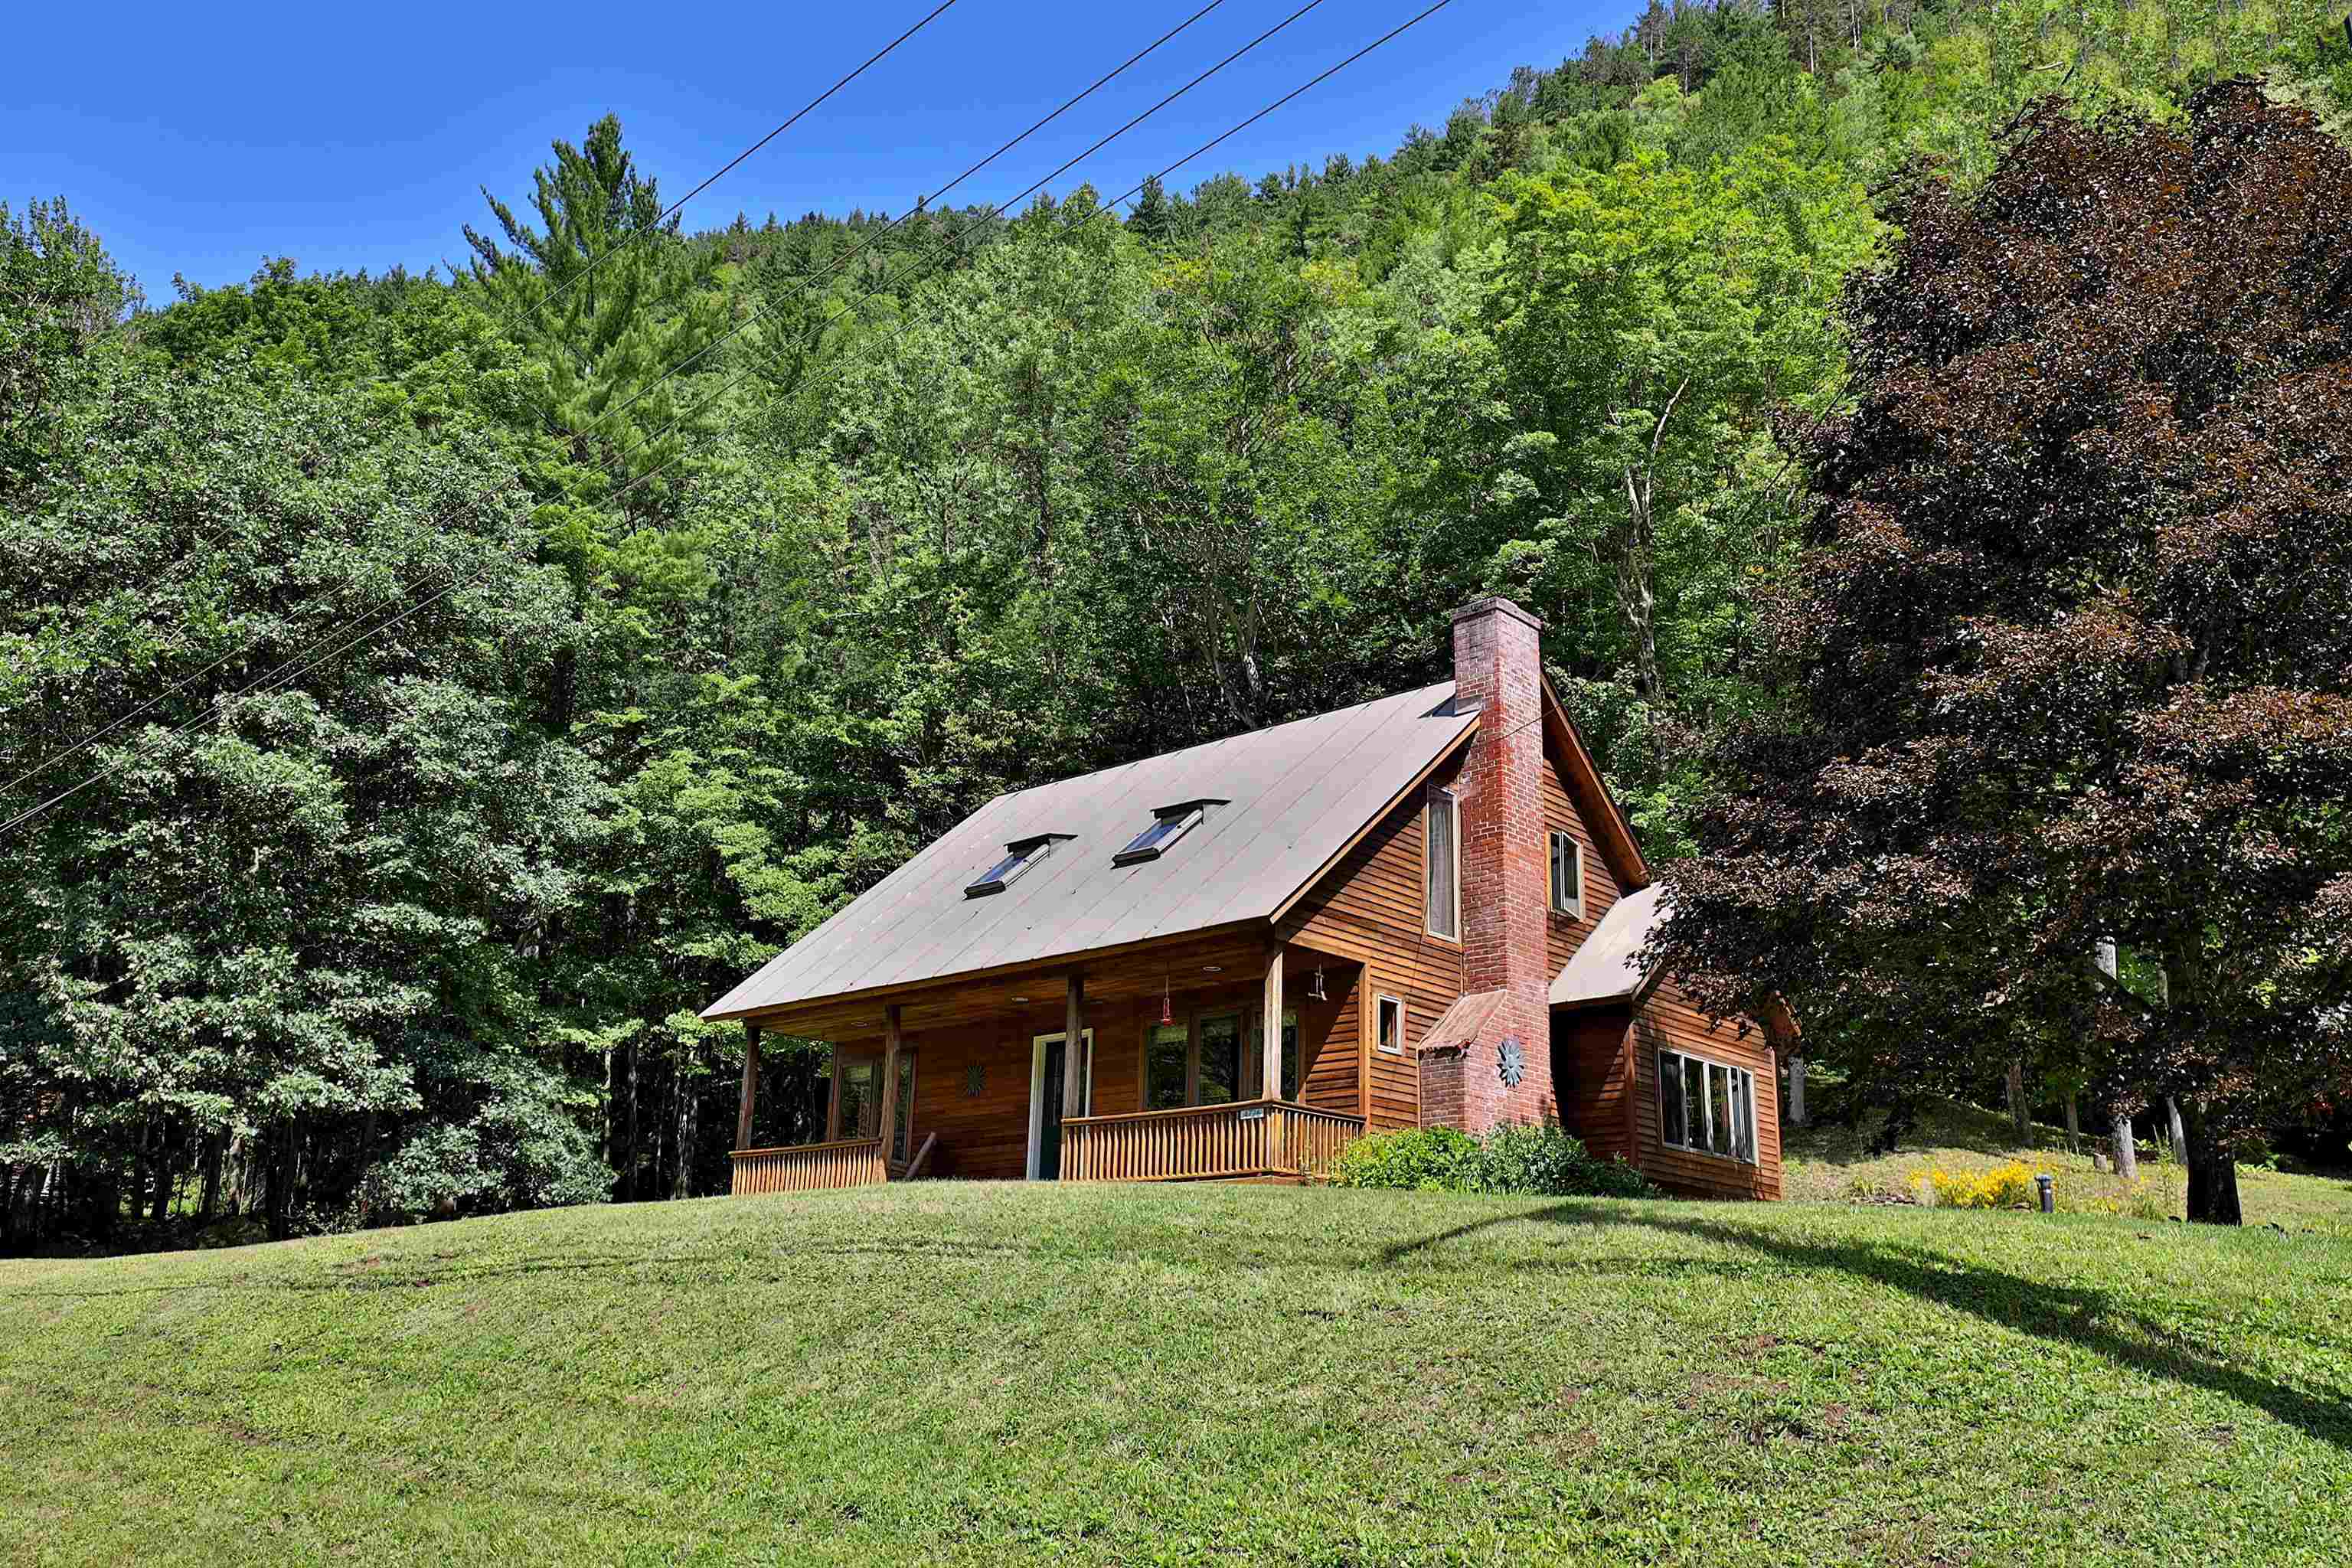 PLYMOUTH VT Homes for sale